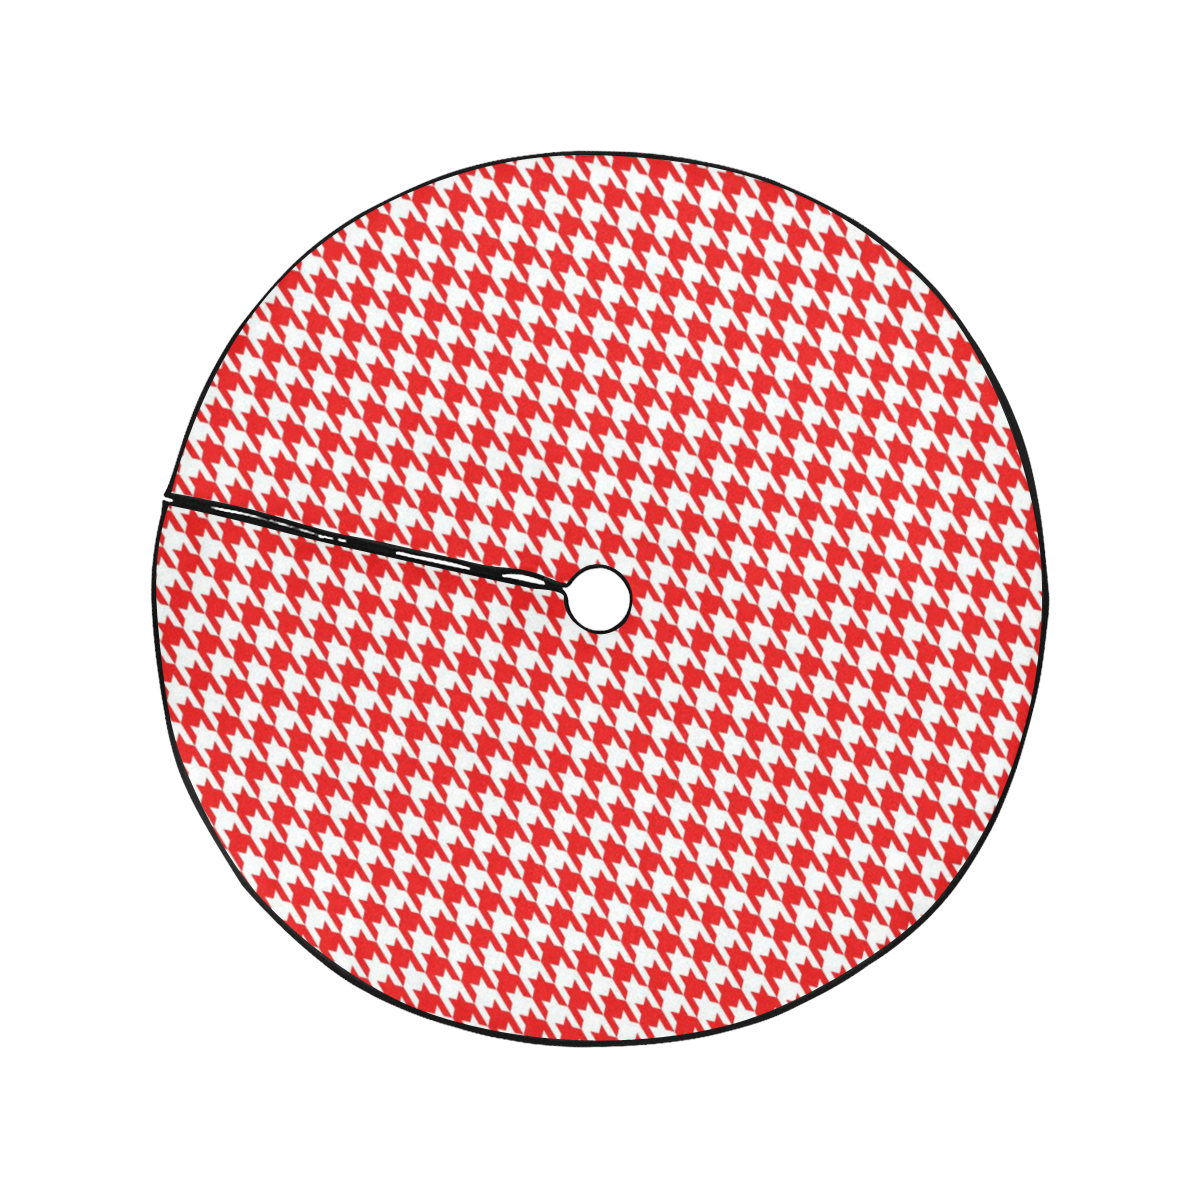 Friendly Houndstooth Pattern,red by FeelGood Christmas Tree Skirt 47" x 47"